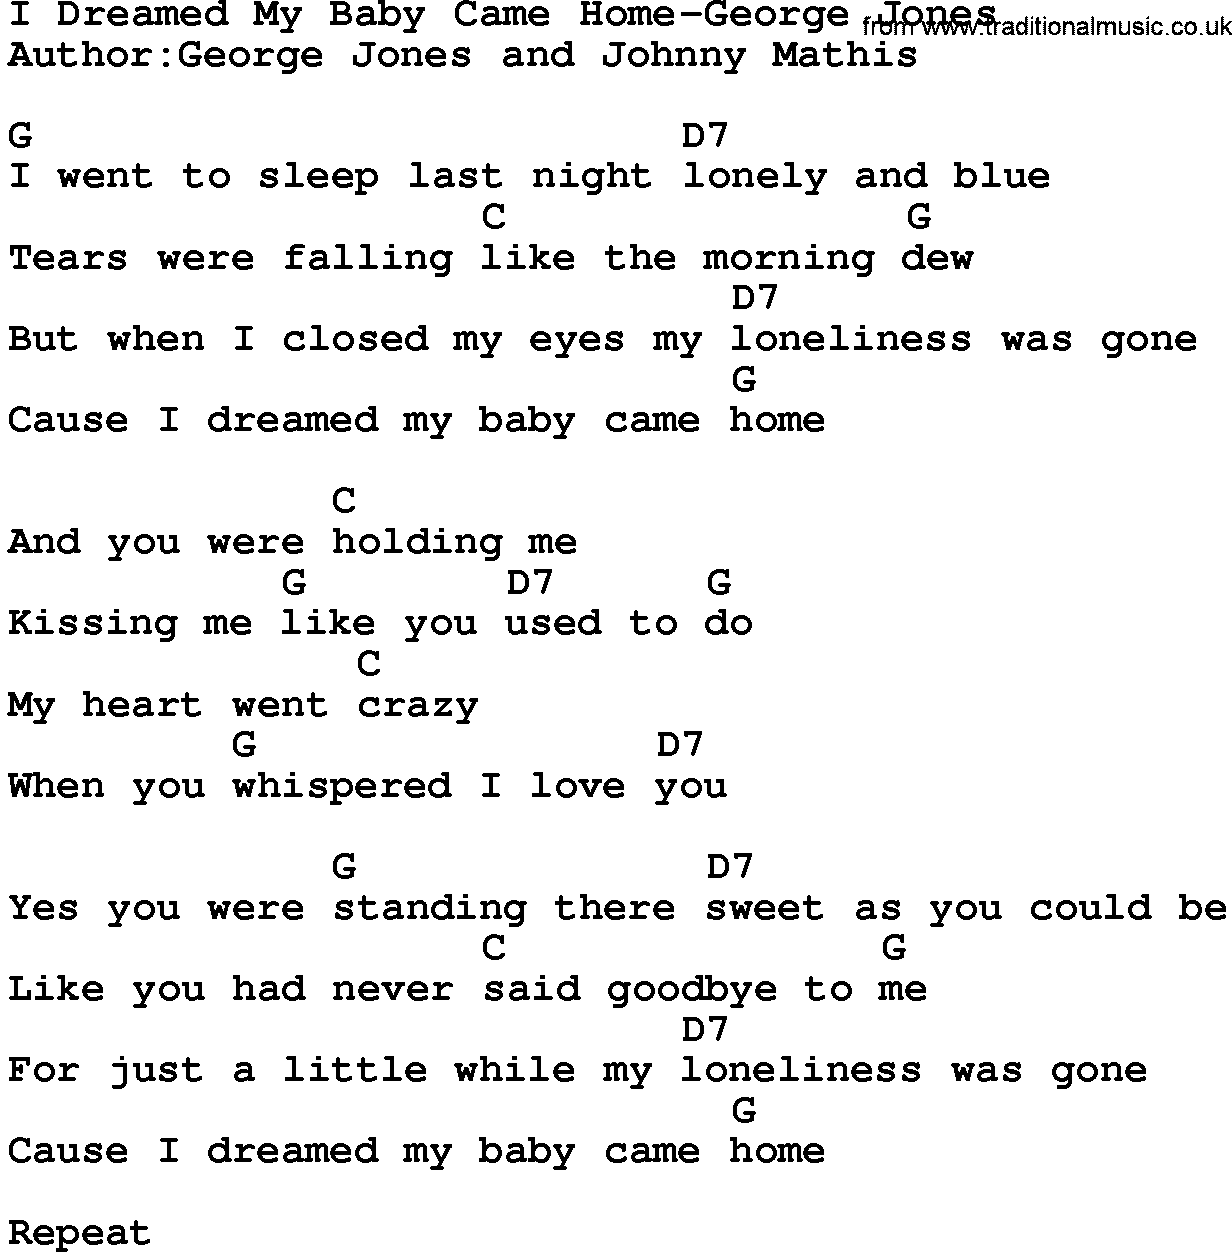 Country music song: I Dreamed My Baby Came Home-George Jones lyrics and chords